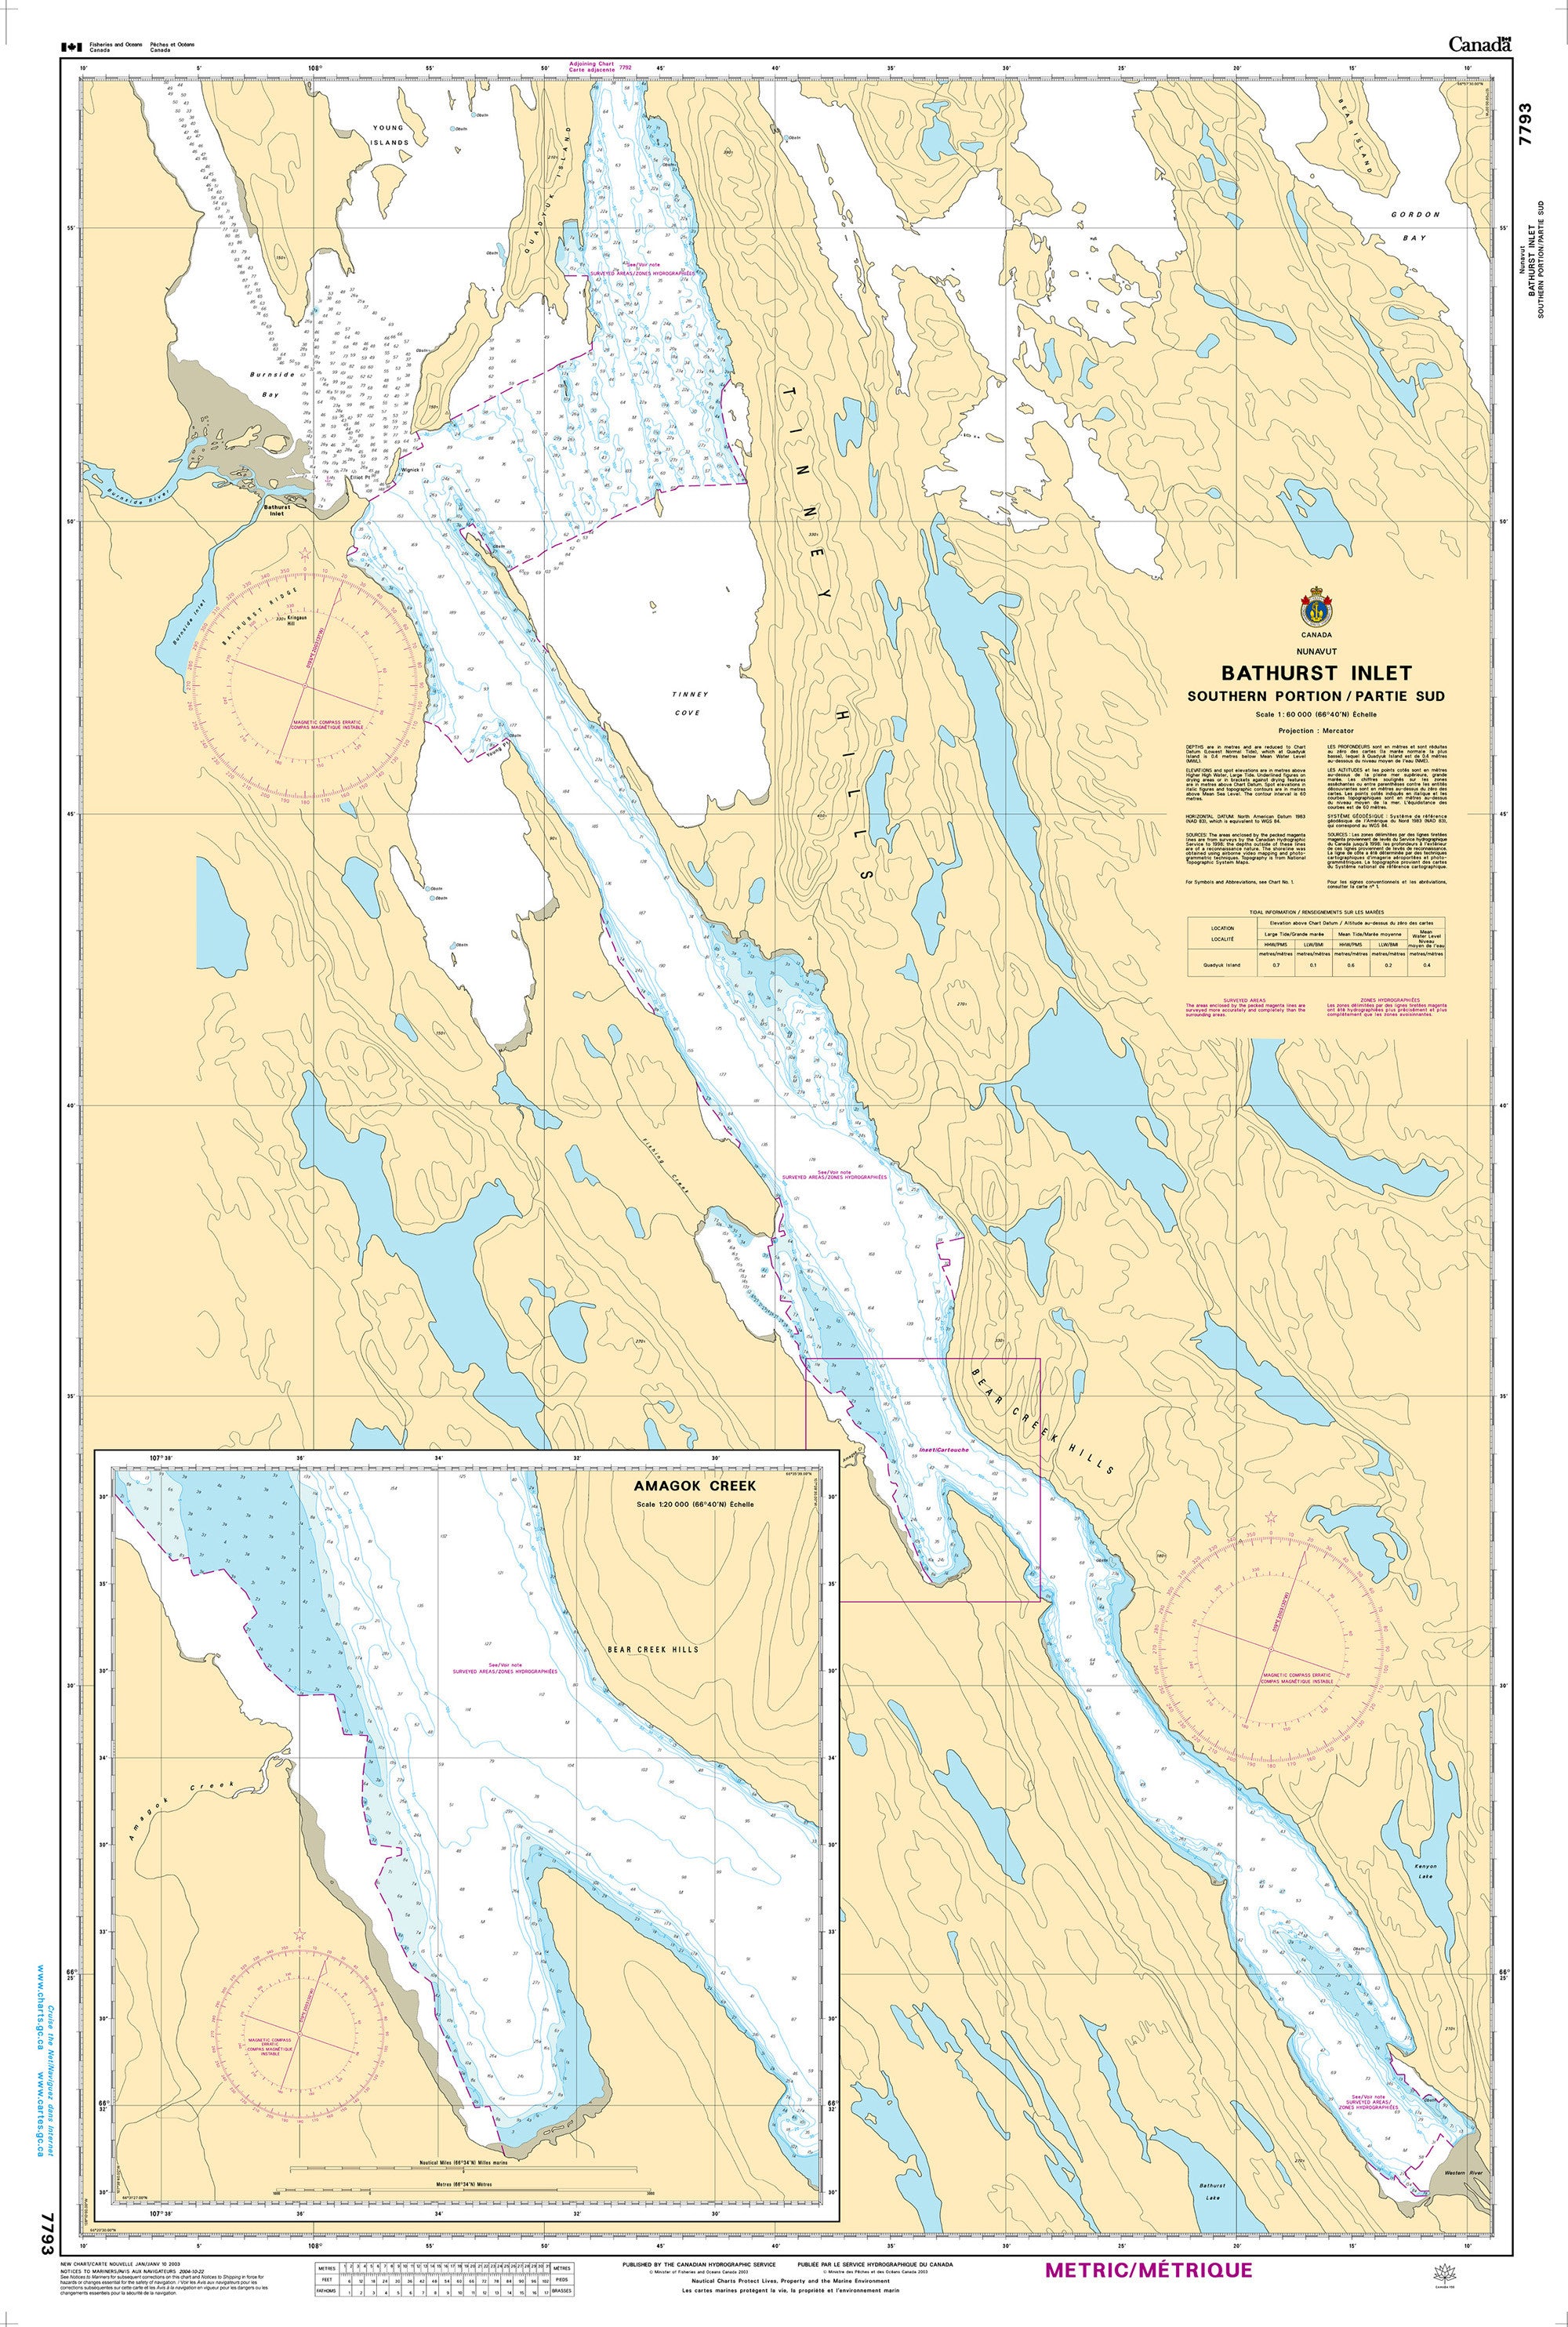 Canadian Hydrographic Service Nautical Chart CHS7793: Bathurst Inlet - Southern Portion/Partie sud